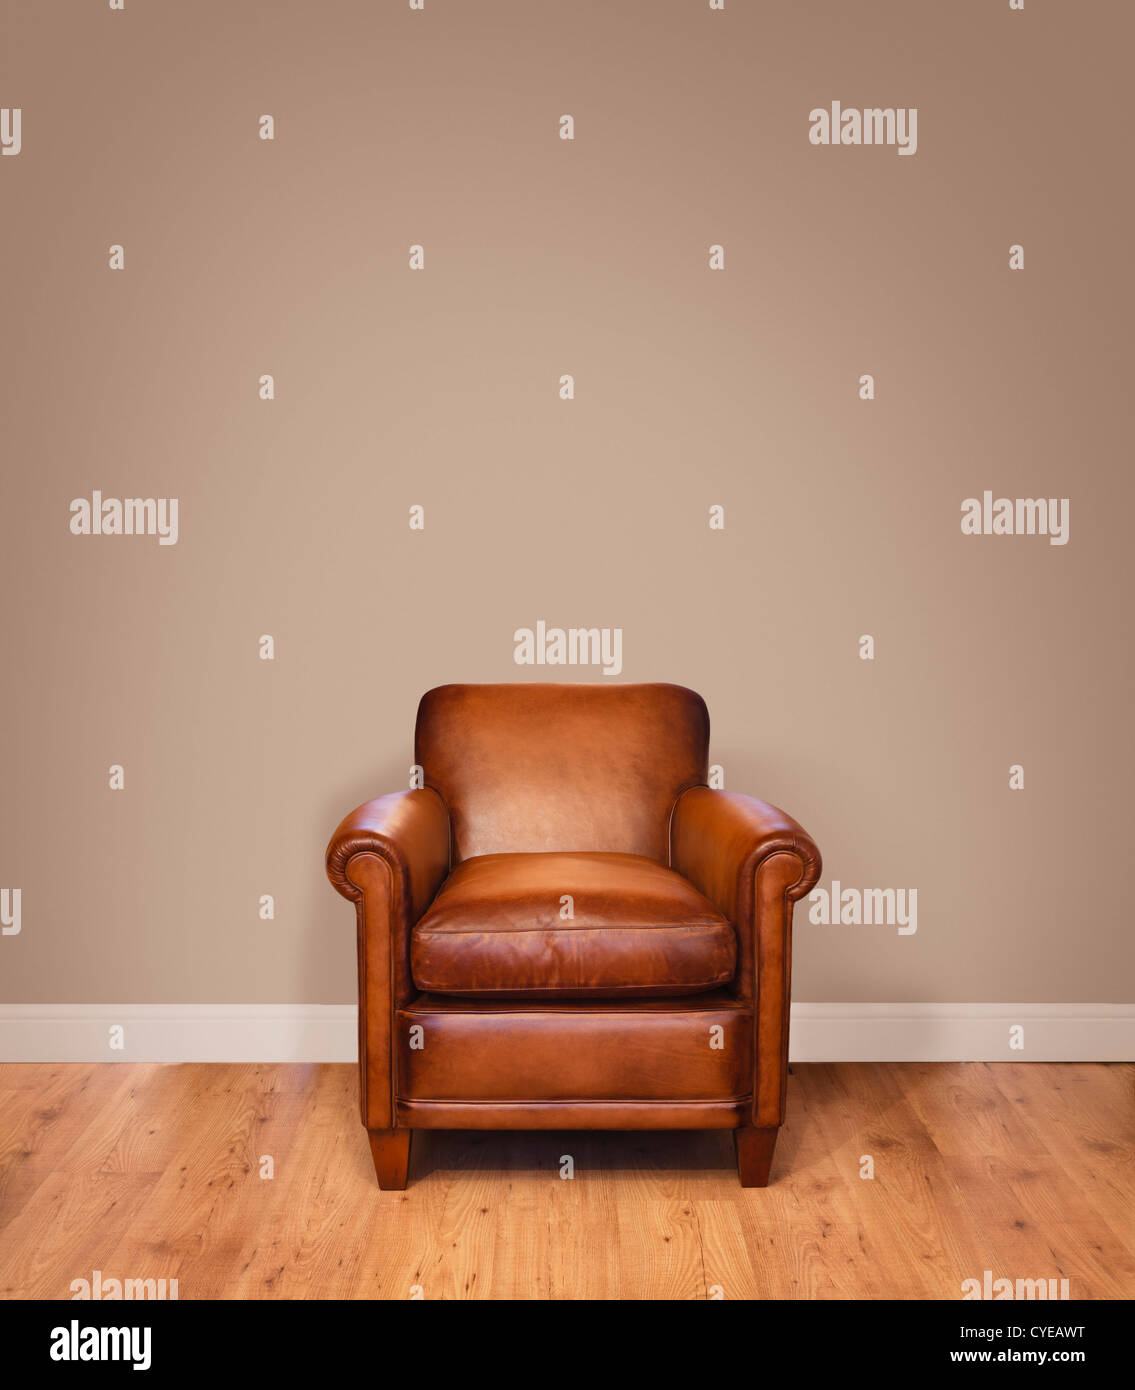 Leather armchair on a wooden floor against a plain background wall with lots of copyspace. The wall has a clipping path. Stock Photo